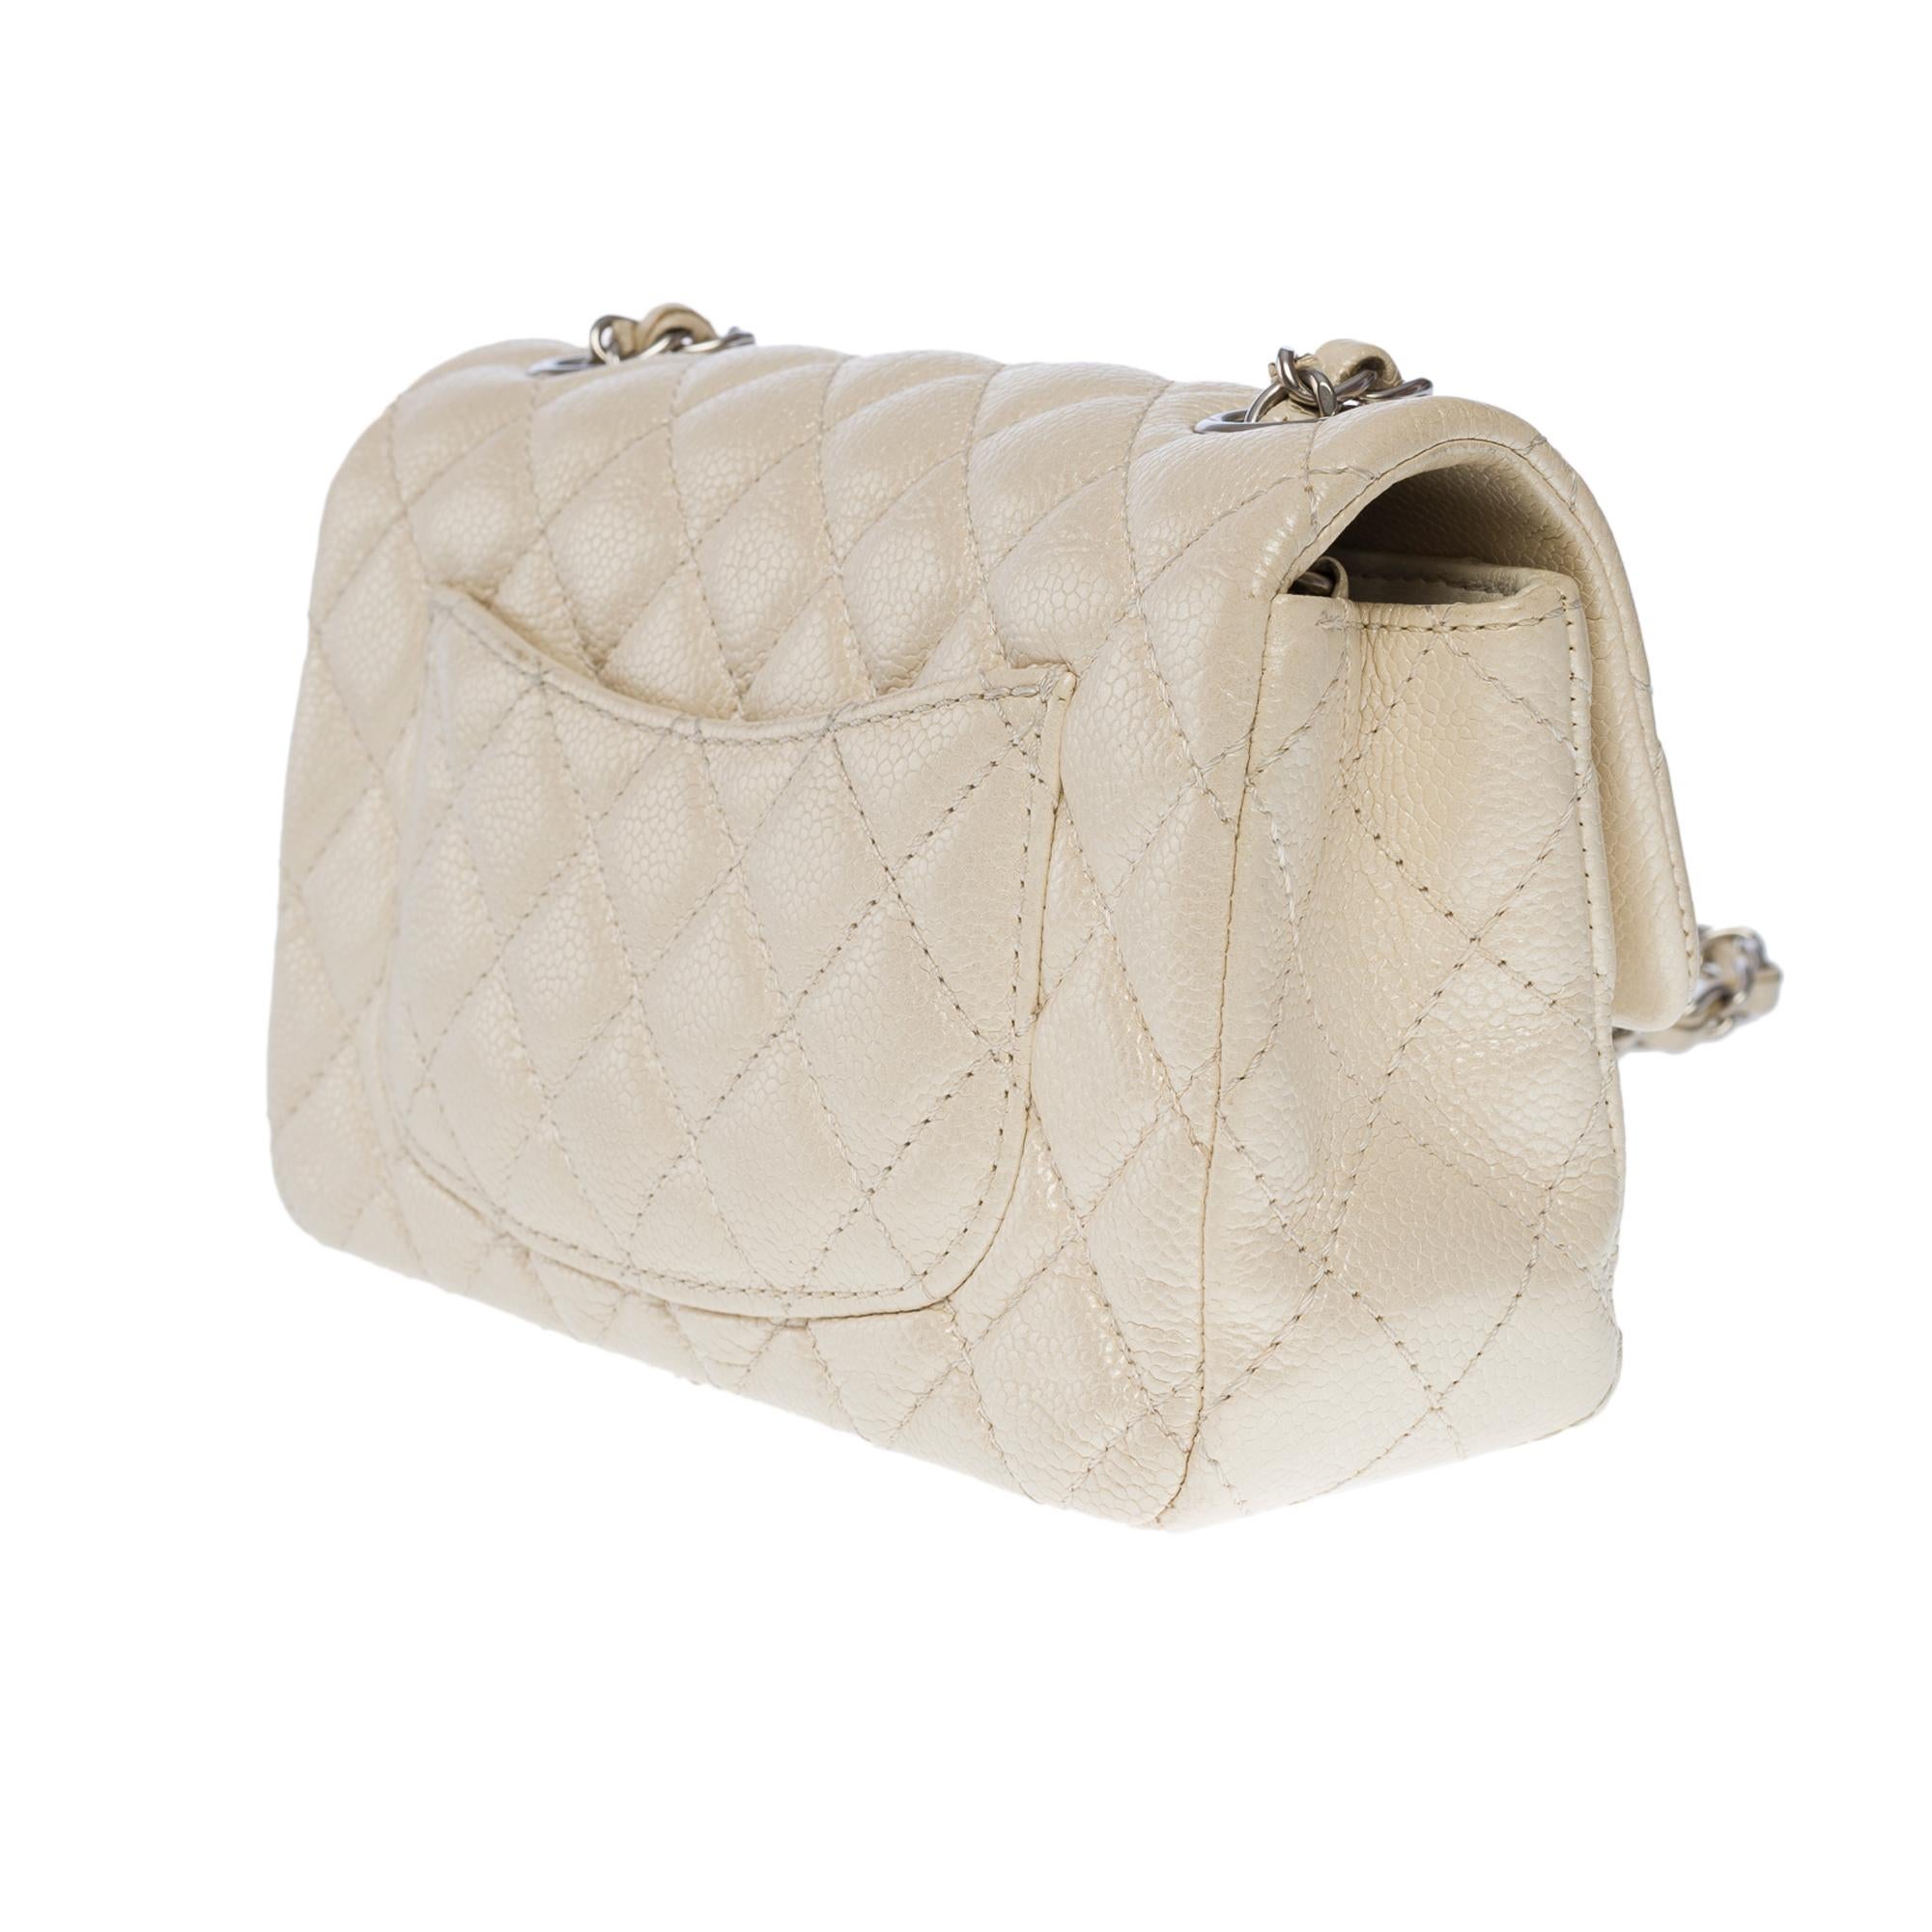 Splendid Chanel Timeless Mini Flap bag in off white pearl quilted leather, SHW For Sale 1